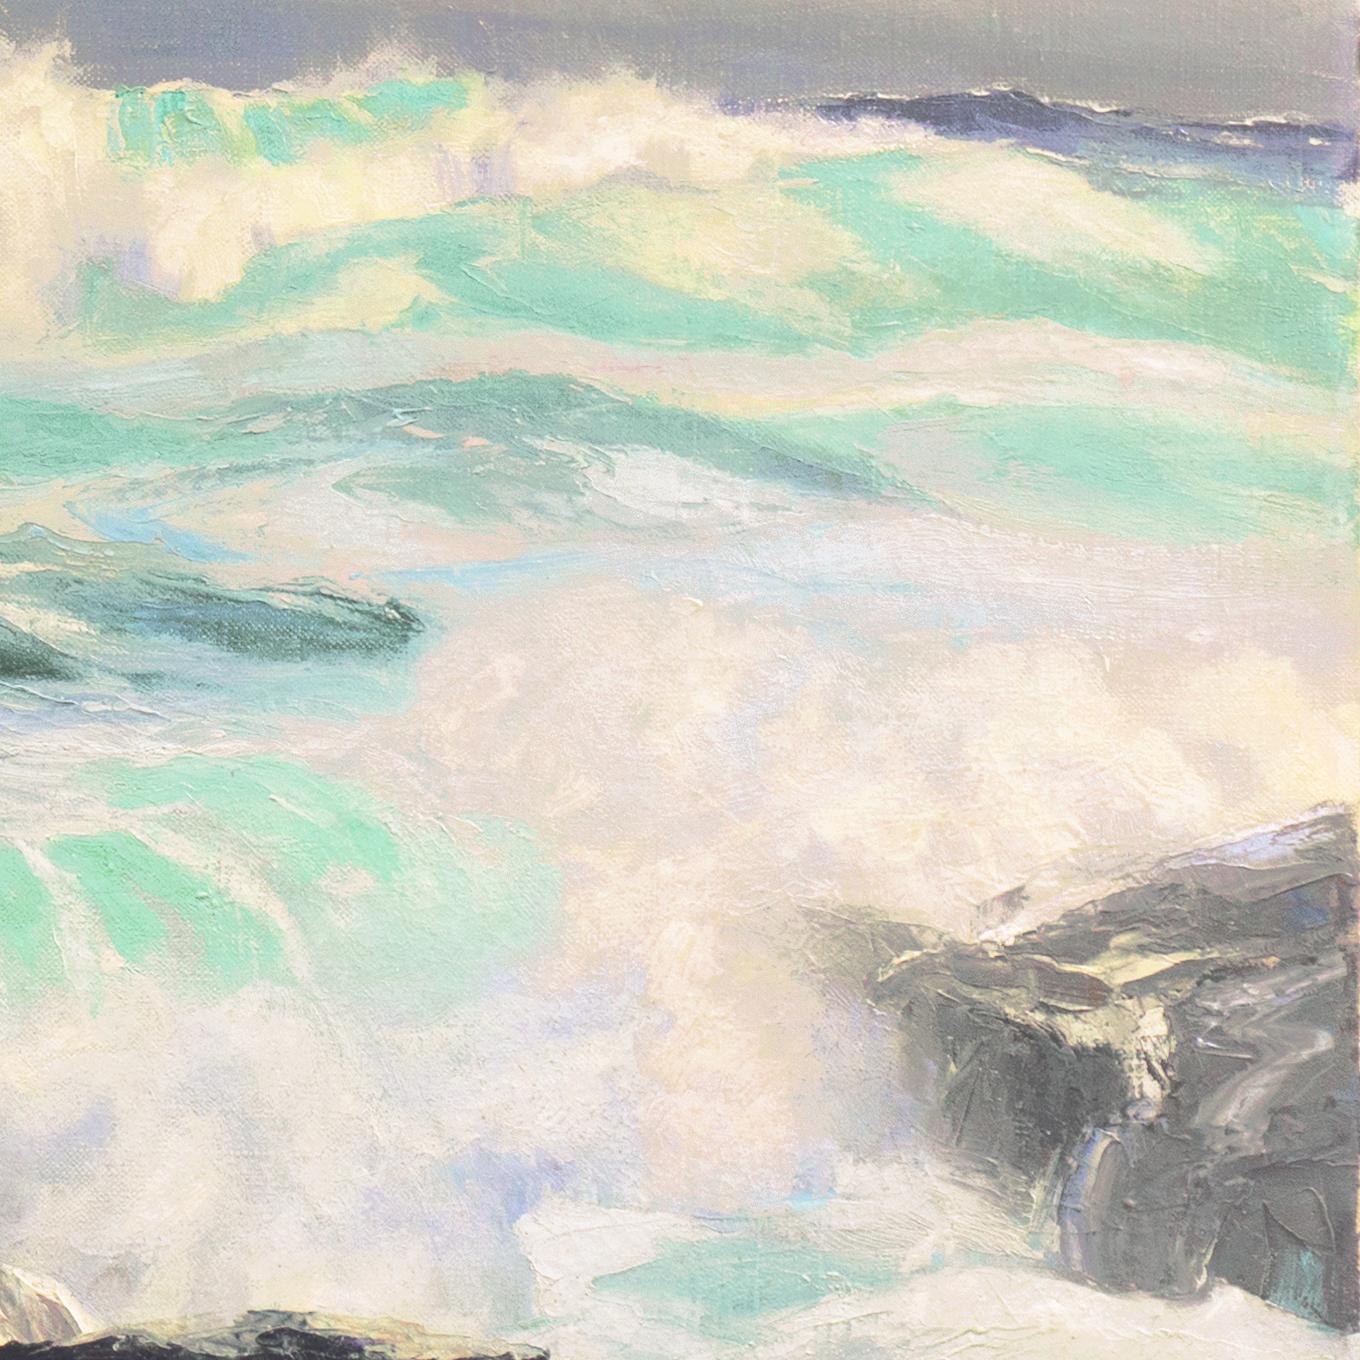 Signed lower right, 'Edward Norton Ward' (American, born 1928) and painted circa 1960; additionally signed, verso, and titled 'Heavy Seas, Pt. Lobos'.

A substantial evening seascape showing dramatic breakers rolling in towards the the rocky coast